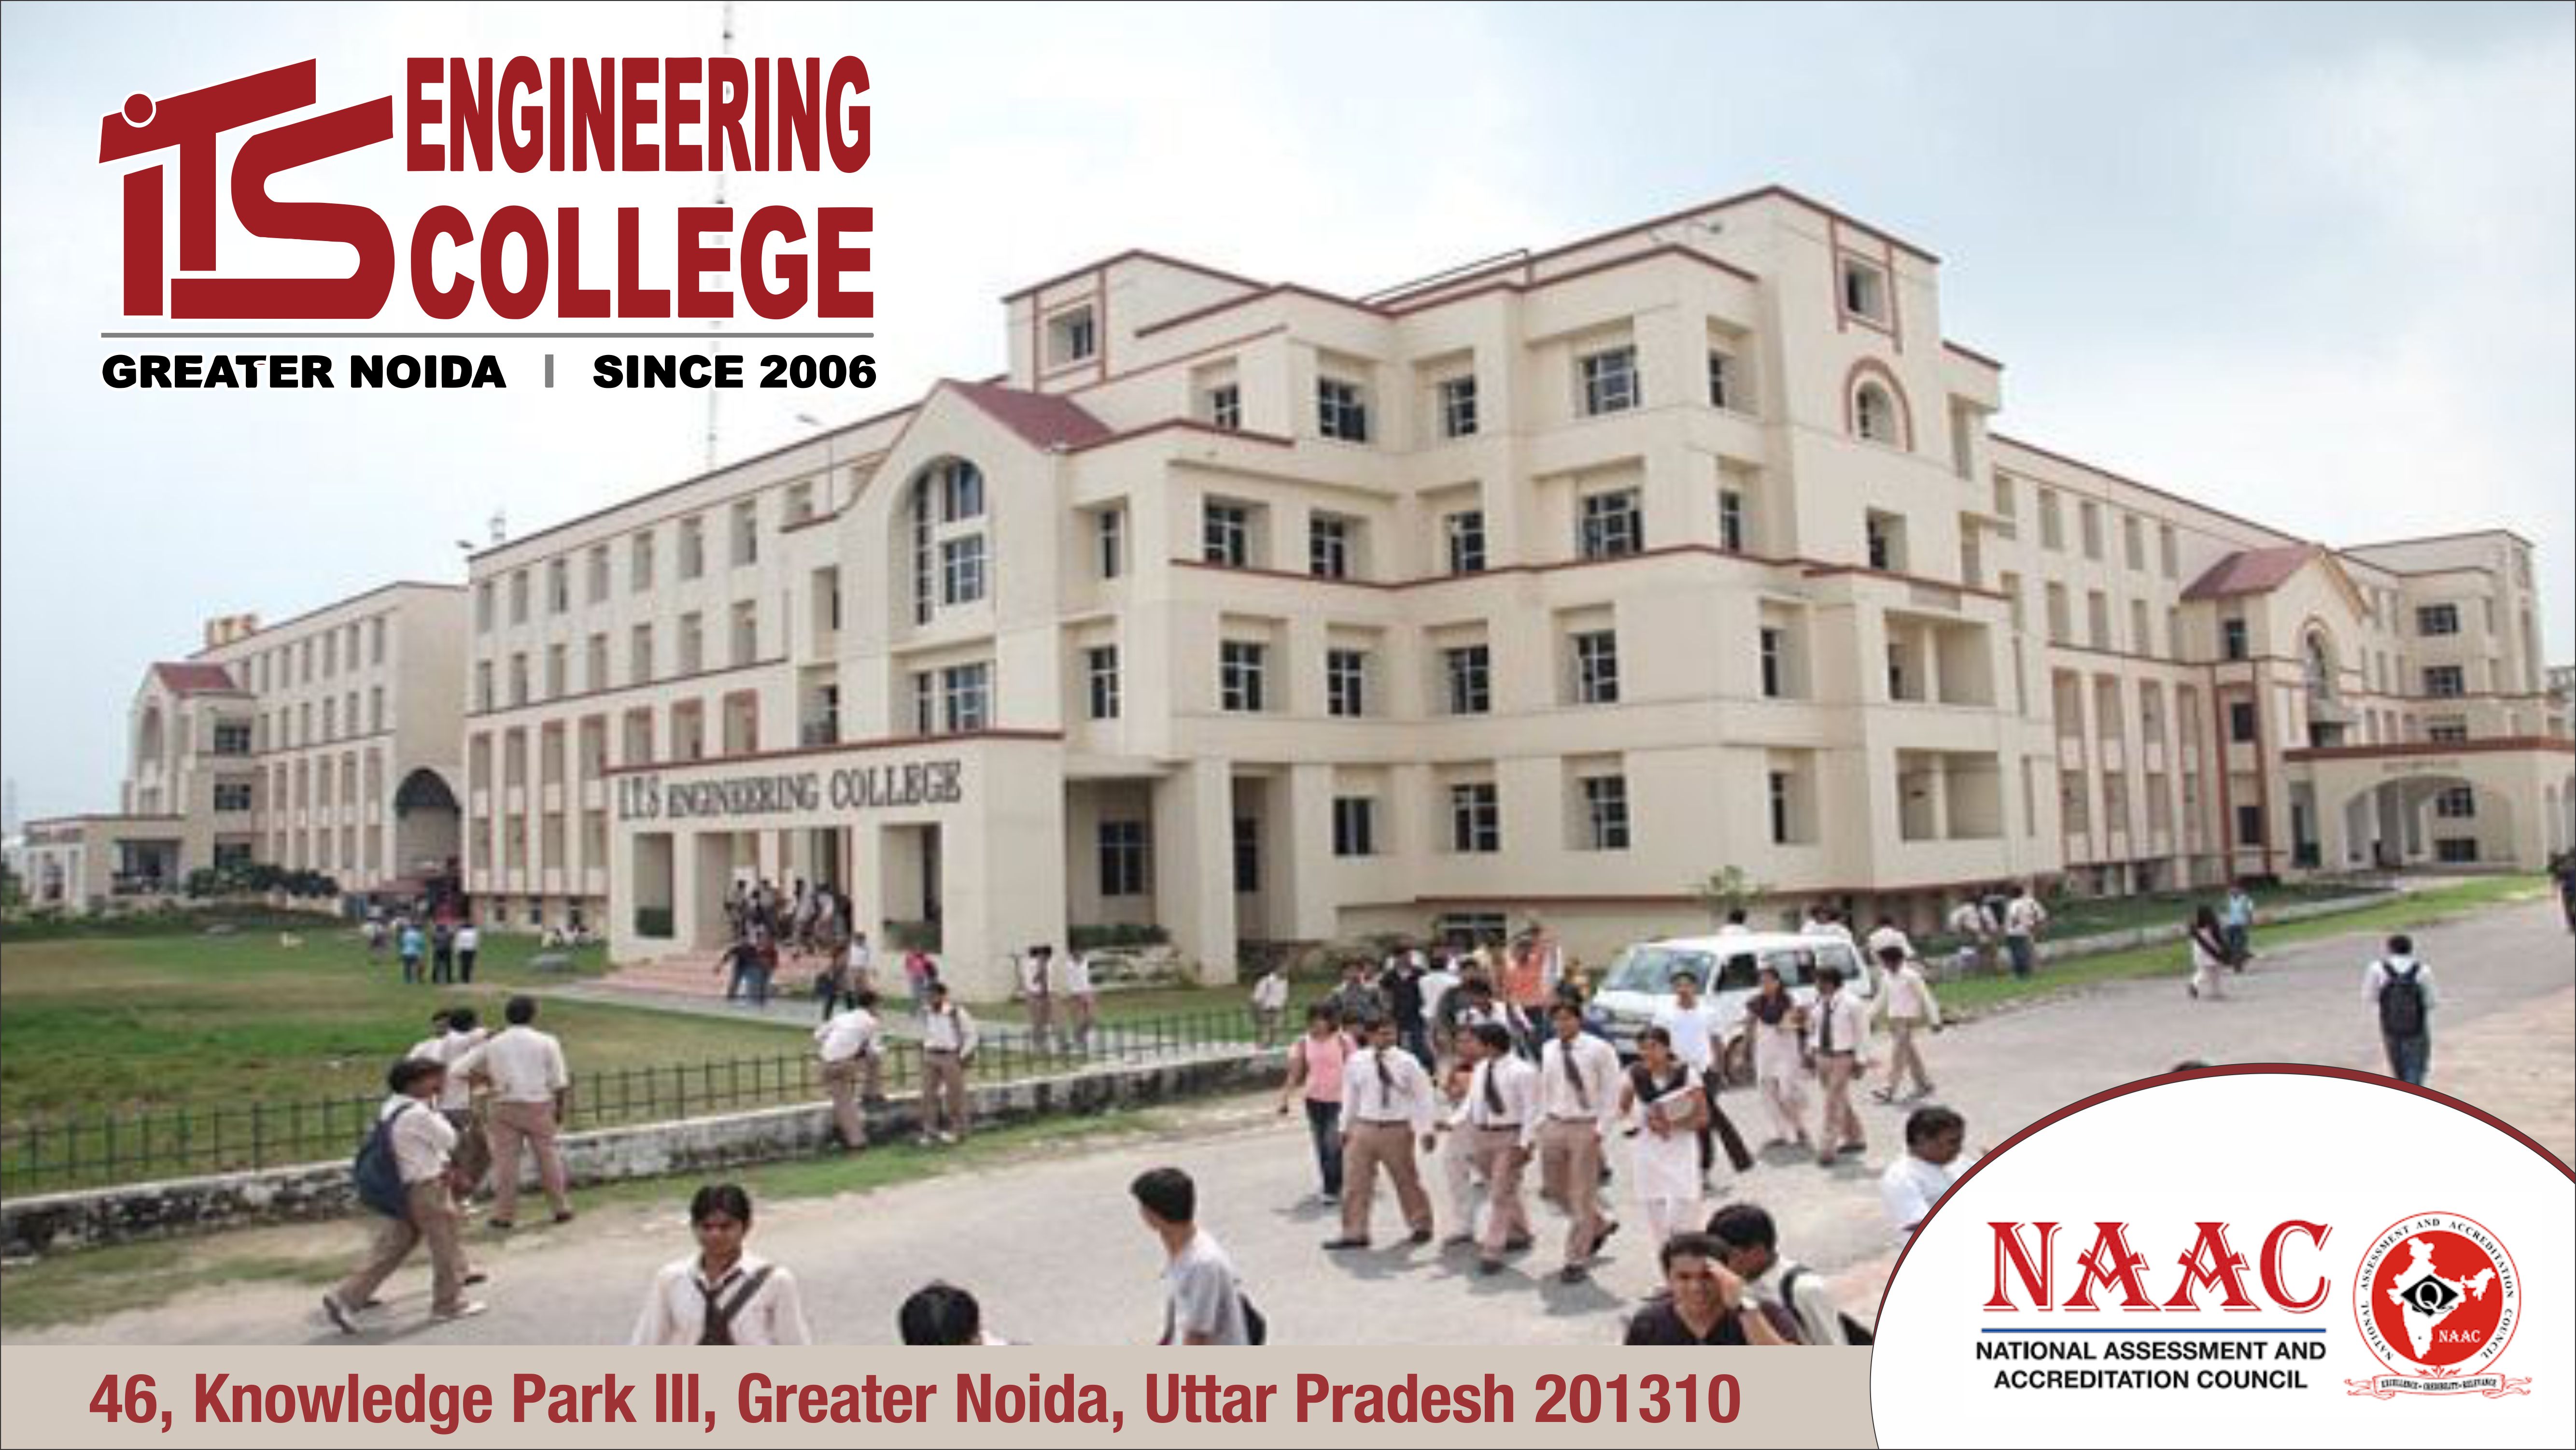 out side view of ITS Engineering College, Greater Noida